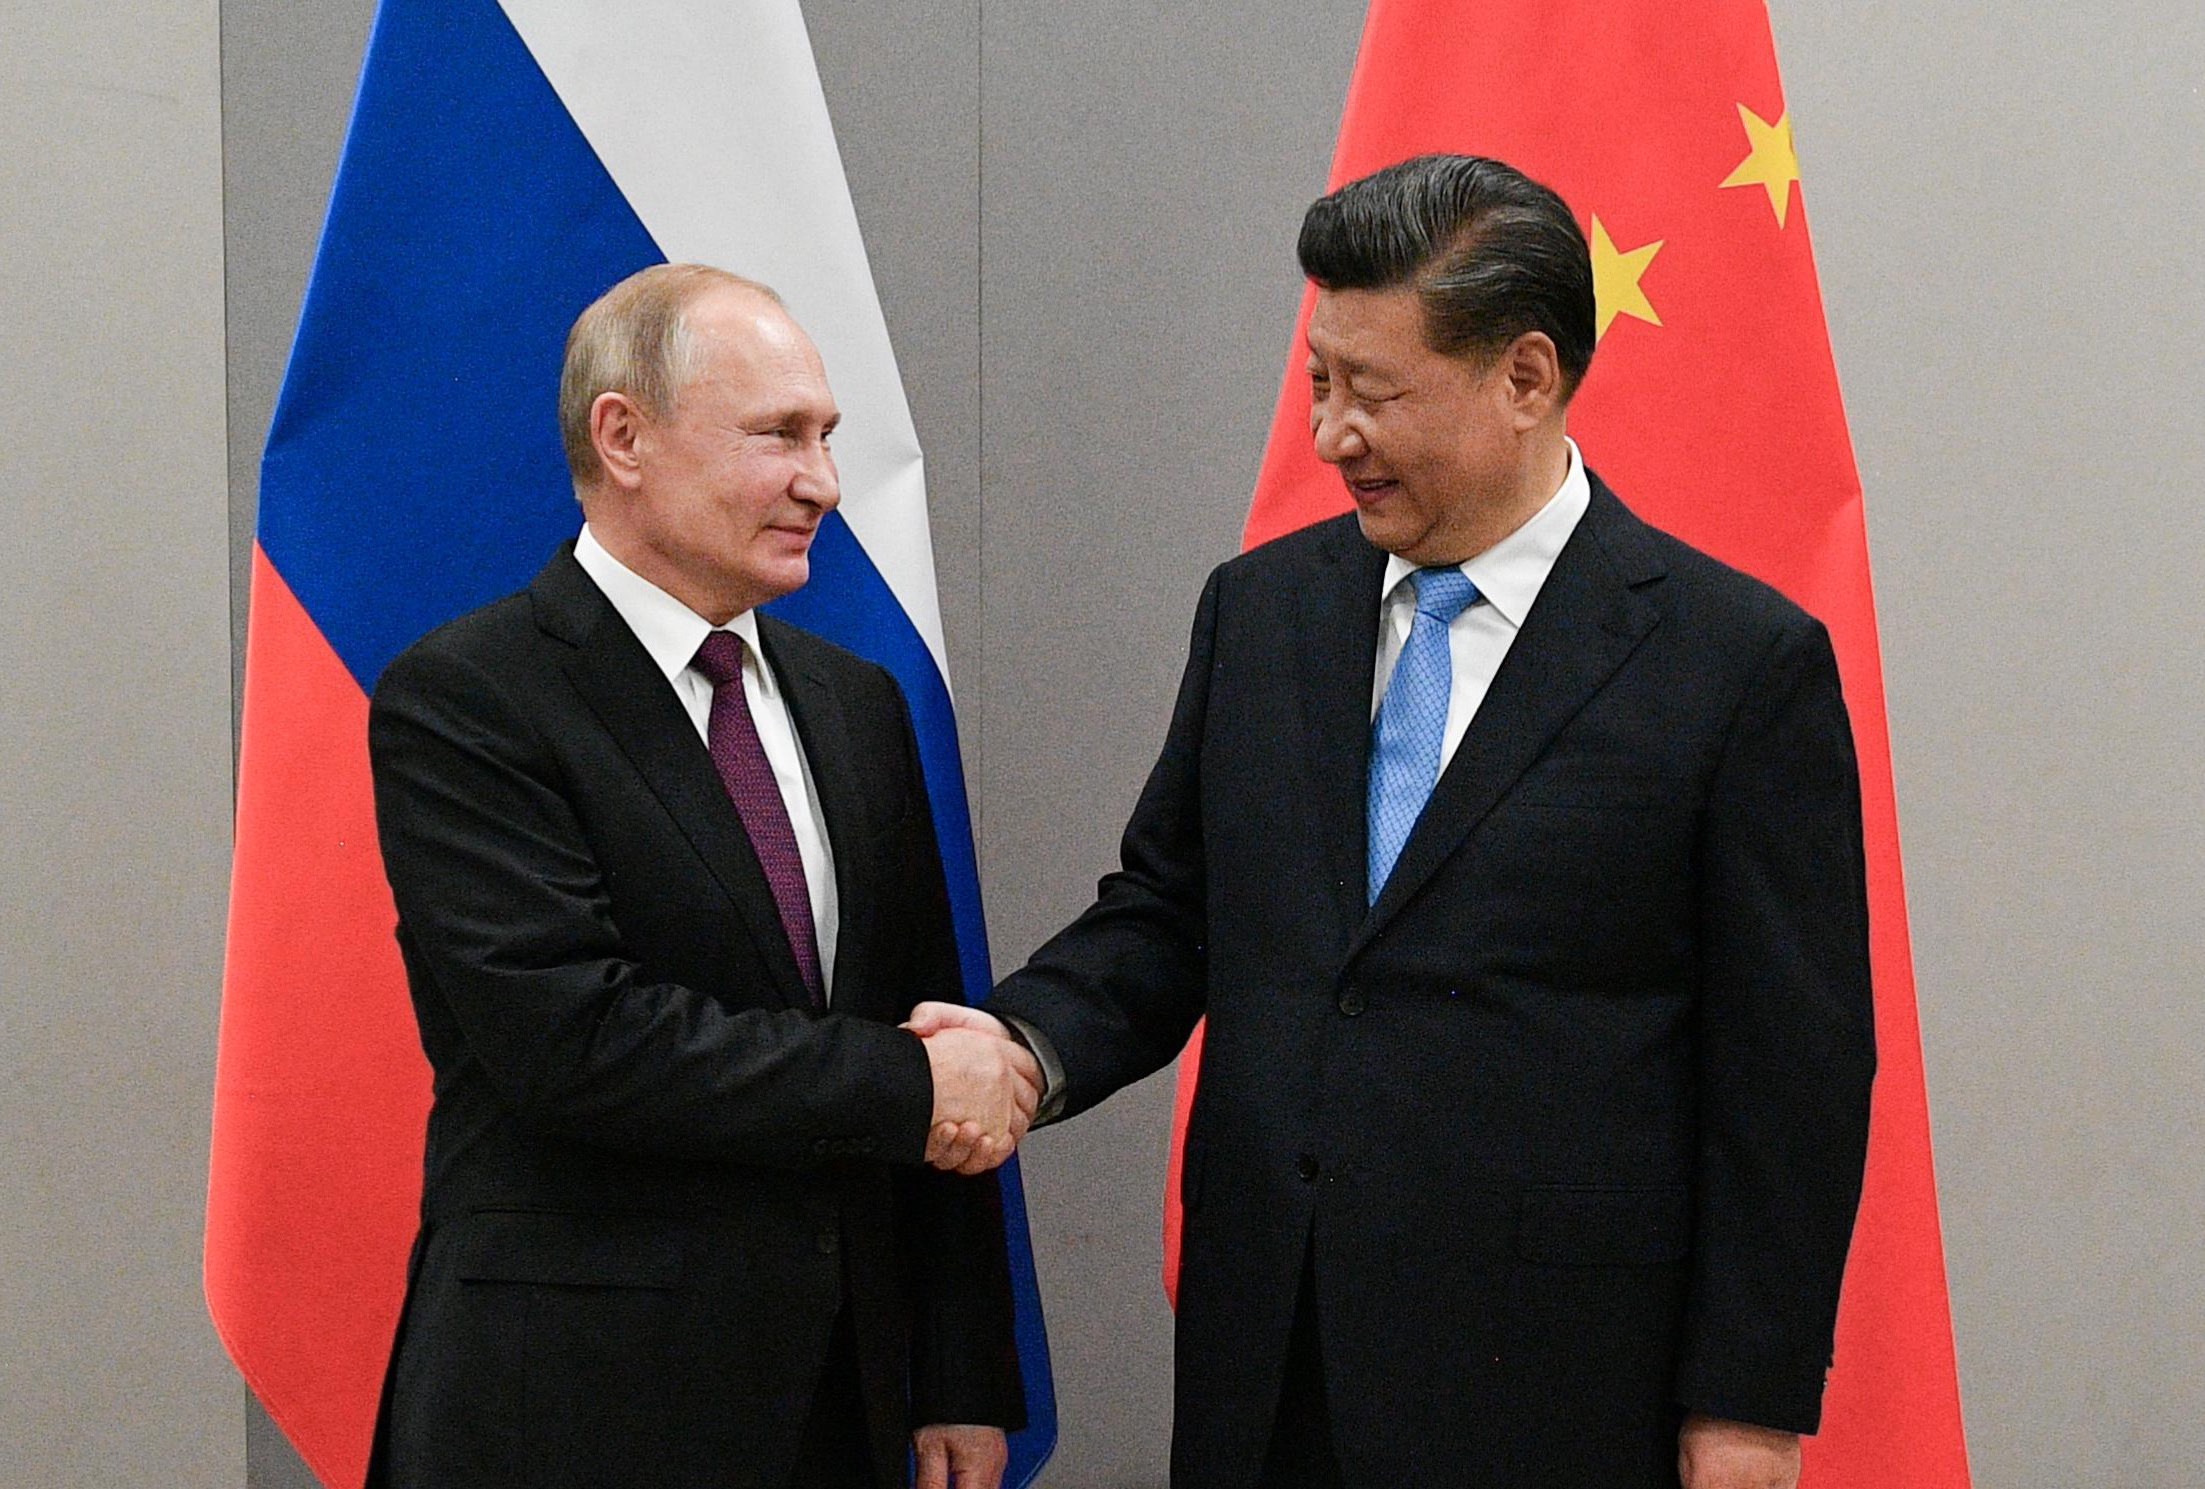 Russian President Vladimir Putin (L) and Chinese President Xi Jinping IMAGE SOURCE: REUTERS